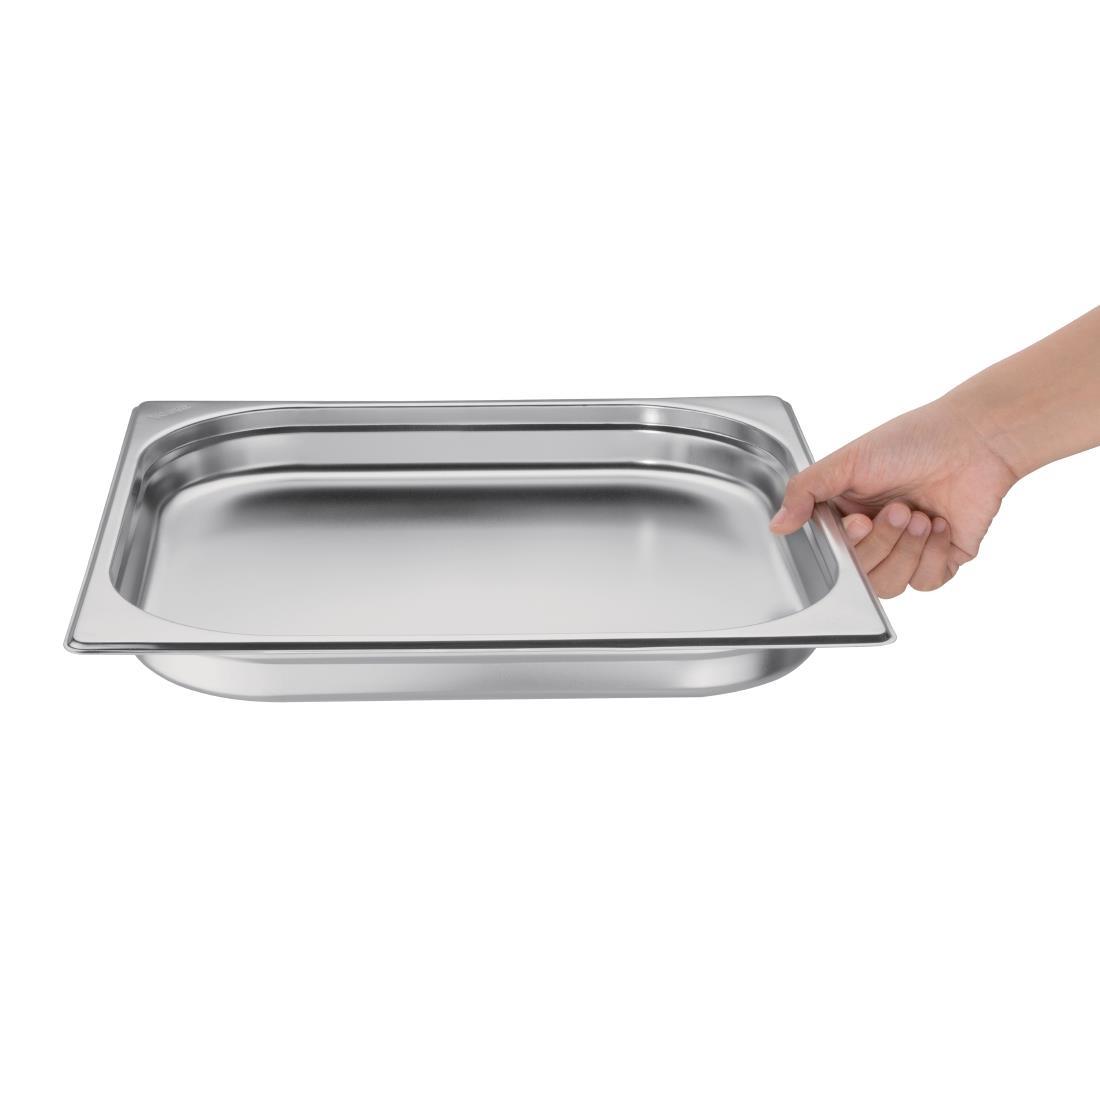 Vogue Stainless Steel Gastronorm 2/3 Pan 20mm - GM314  - 5